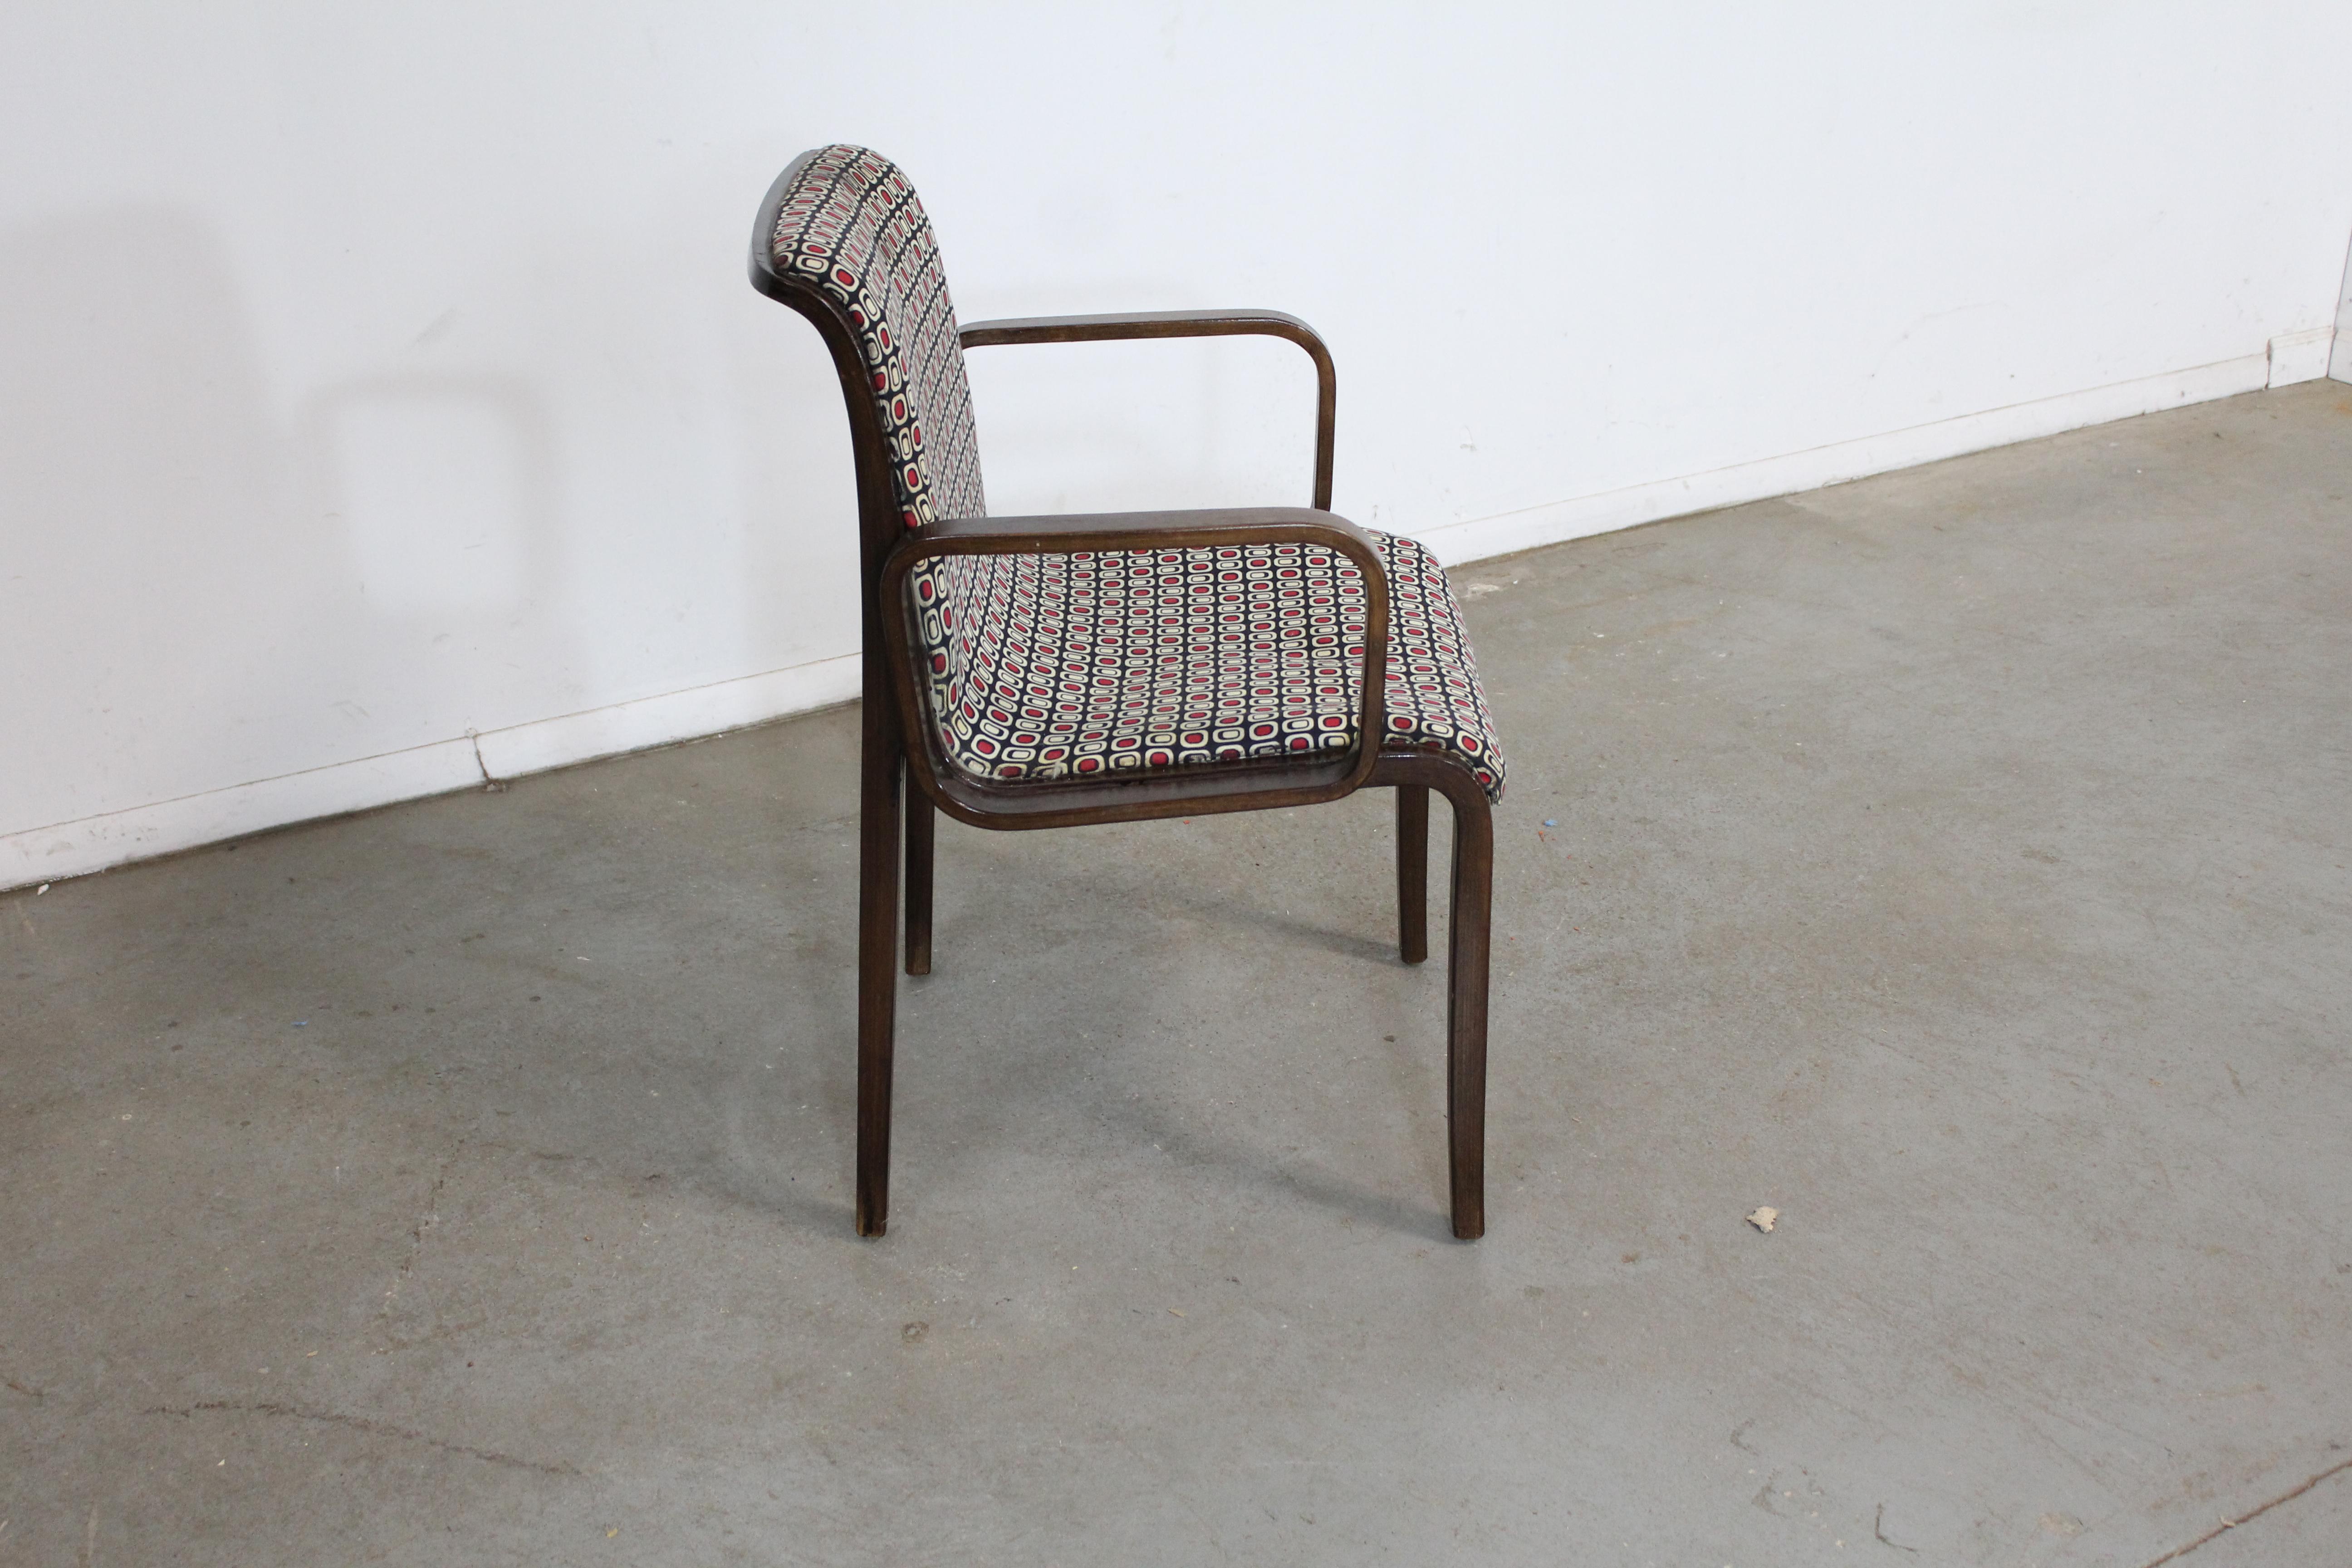 Mid-Century Danish Modern Bill Stevens Knoll walnut arm chair

Offered is a vintage mid-century arm chair (model 1305UO) designed by Bill Stevens for Knoll circa 1970. It is made with bentwood and has the original upholstery. In good condition